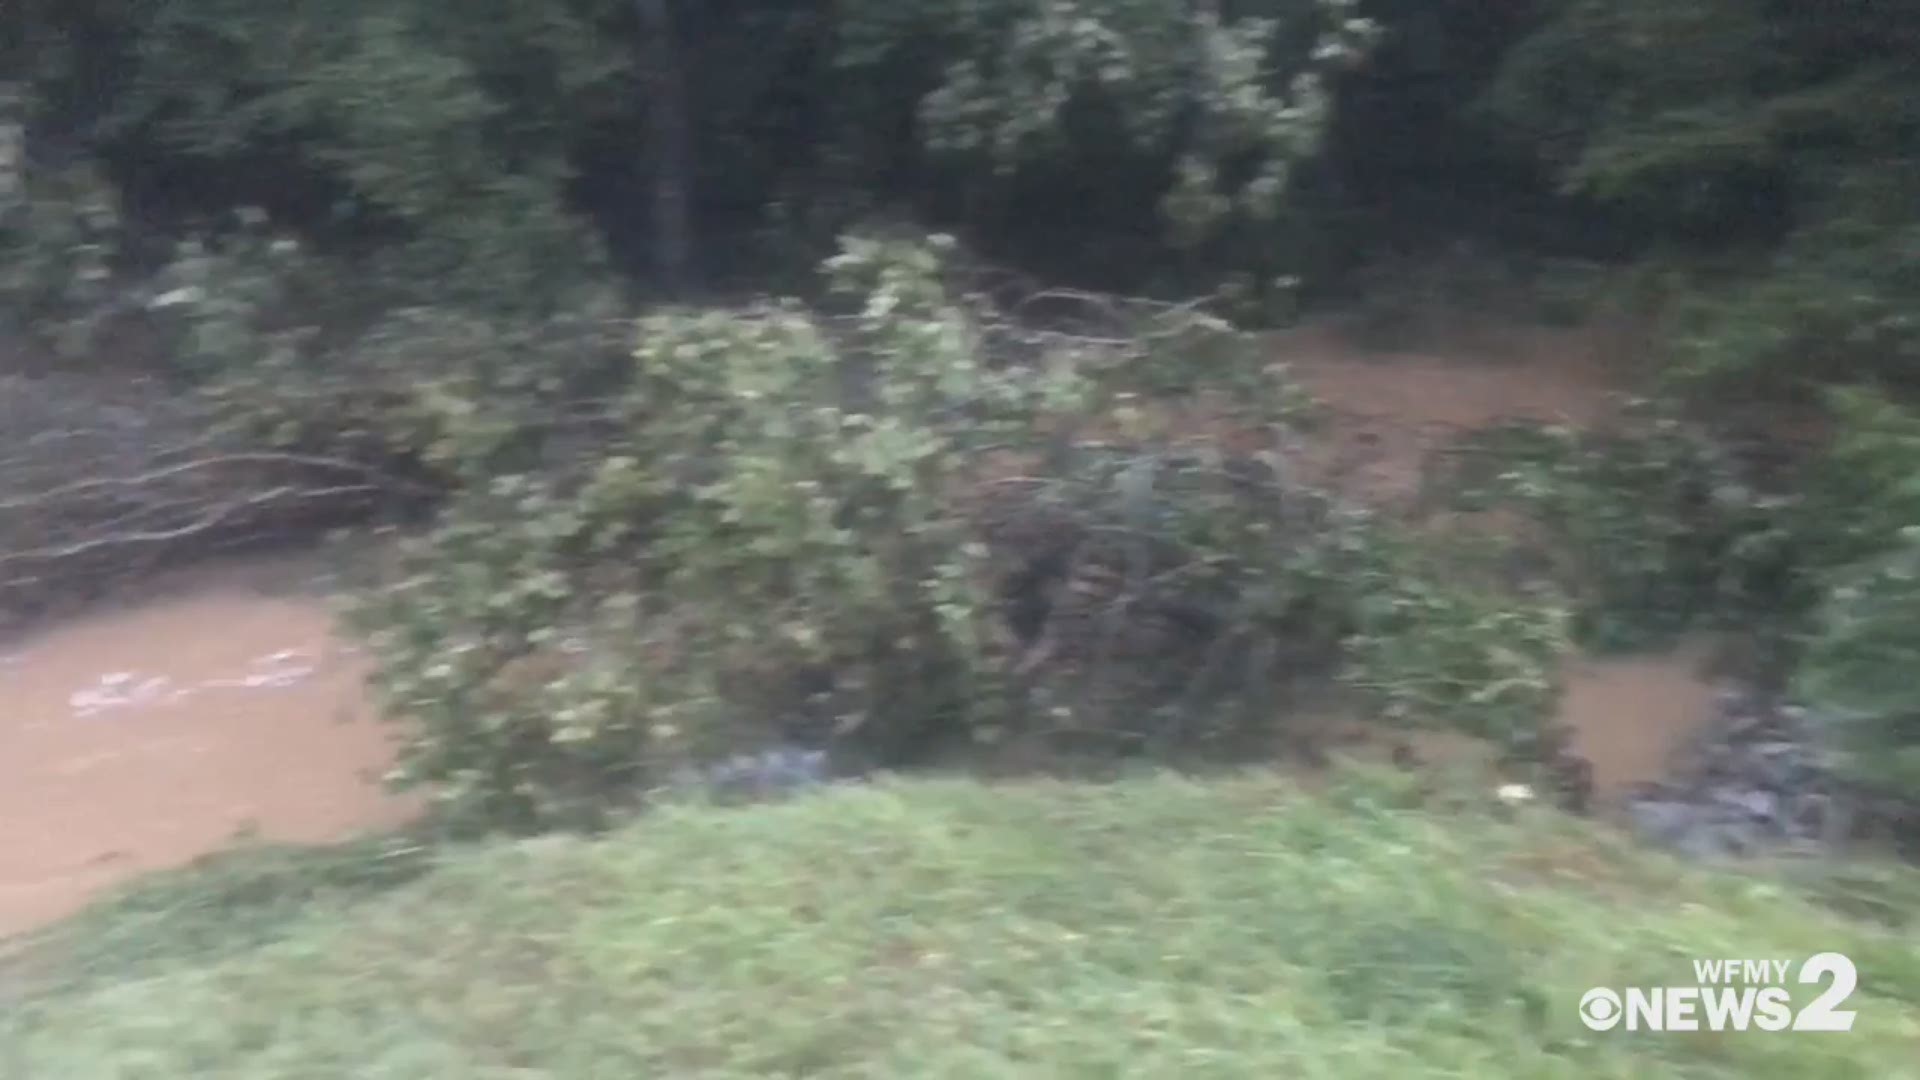 According to Chase Reed, the culvert completely collapsed 30 seconds after they were pulled out of their stranded car.